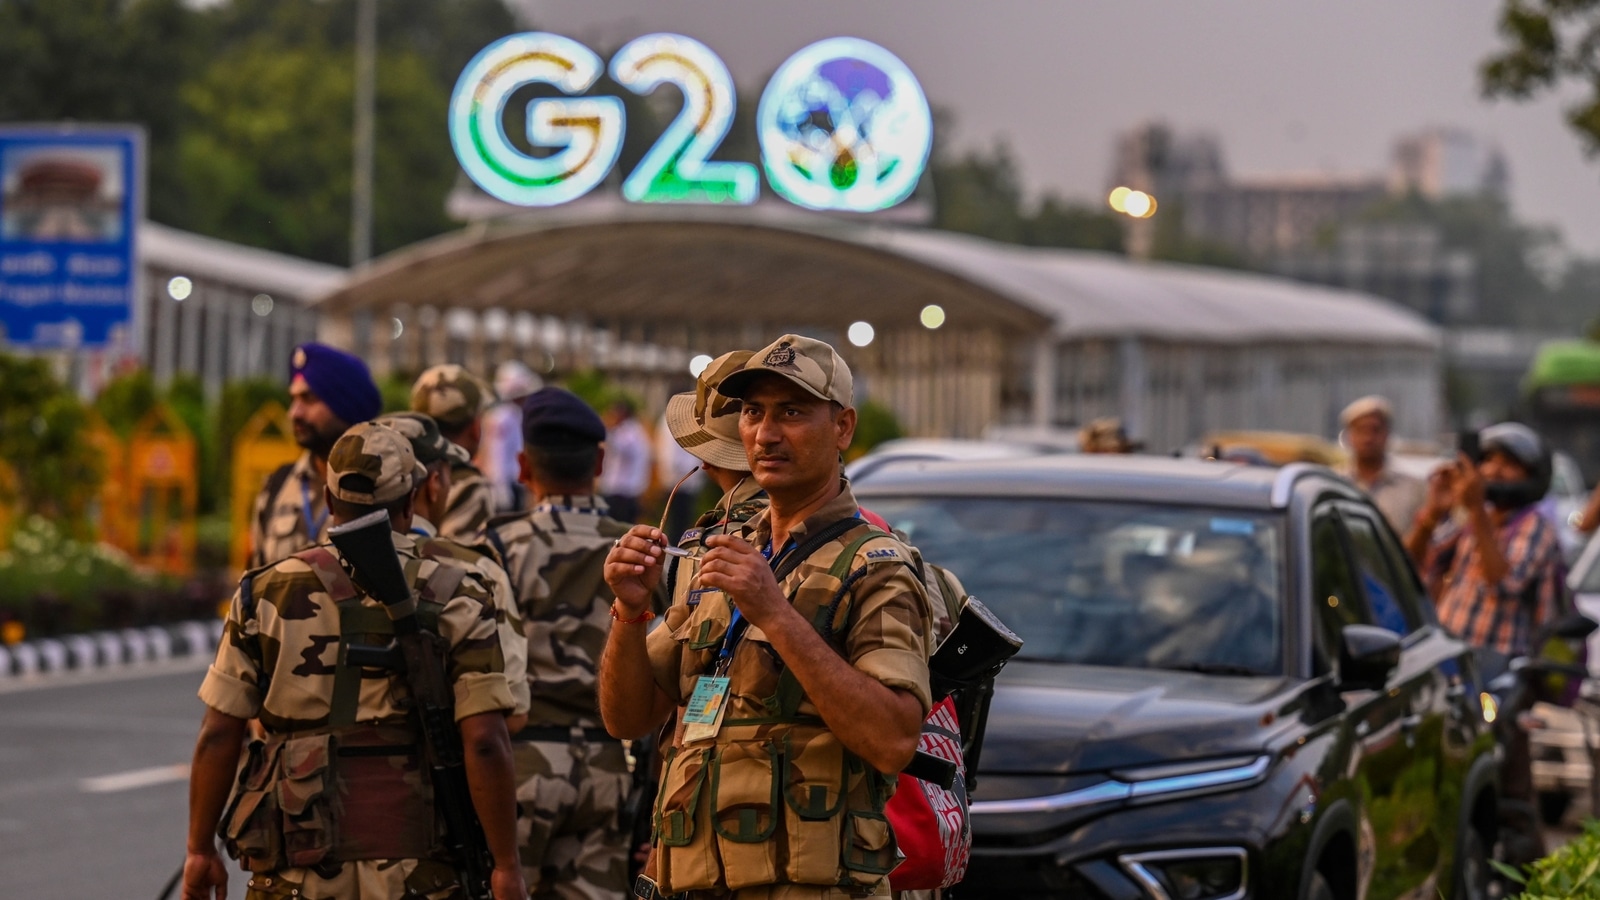 Delhi Traffic Police introduces Virtual Help Desk for real-time traffic updates during G20 Summit